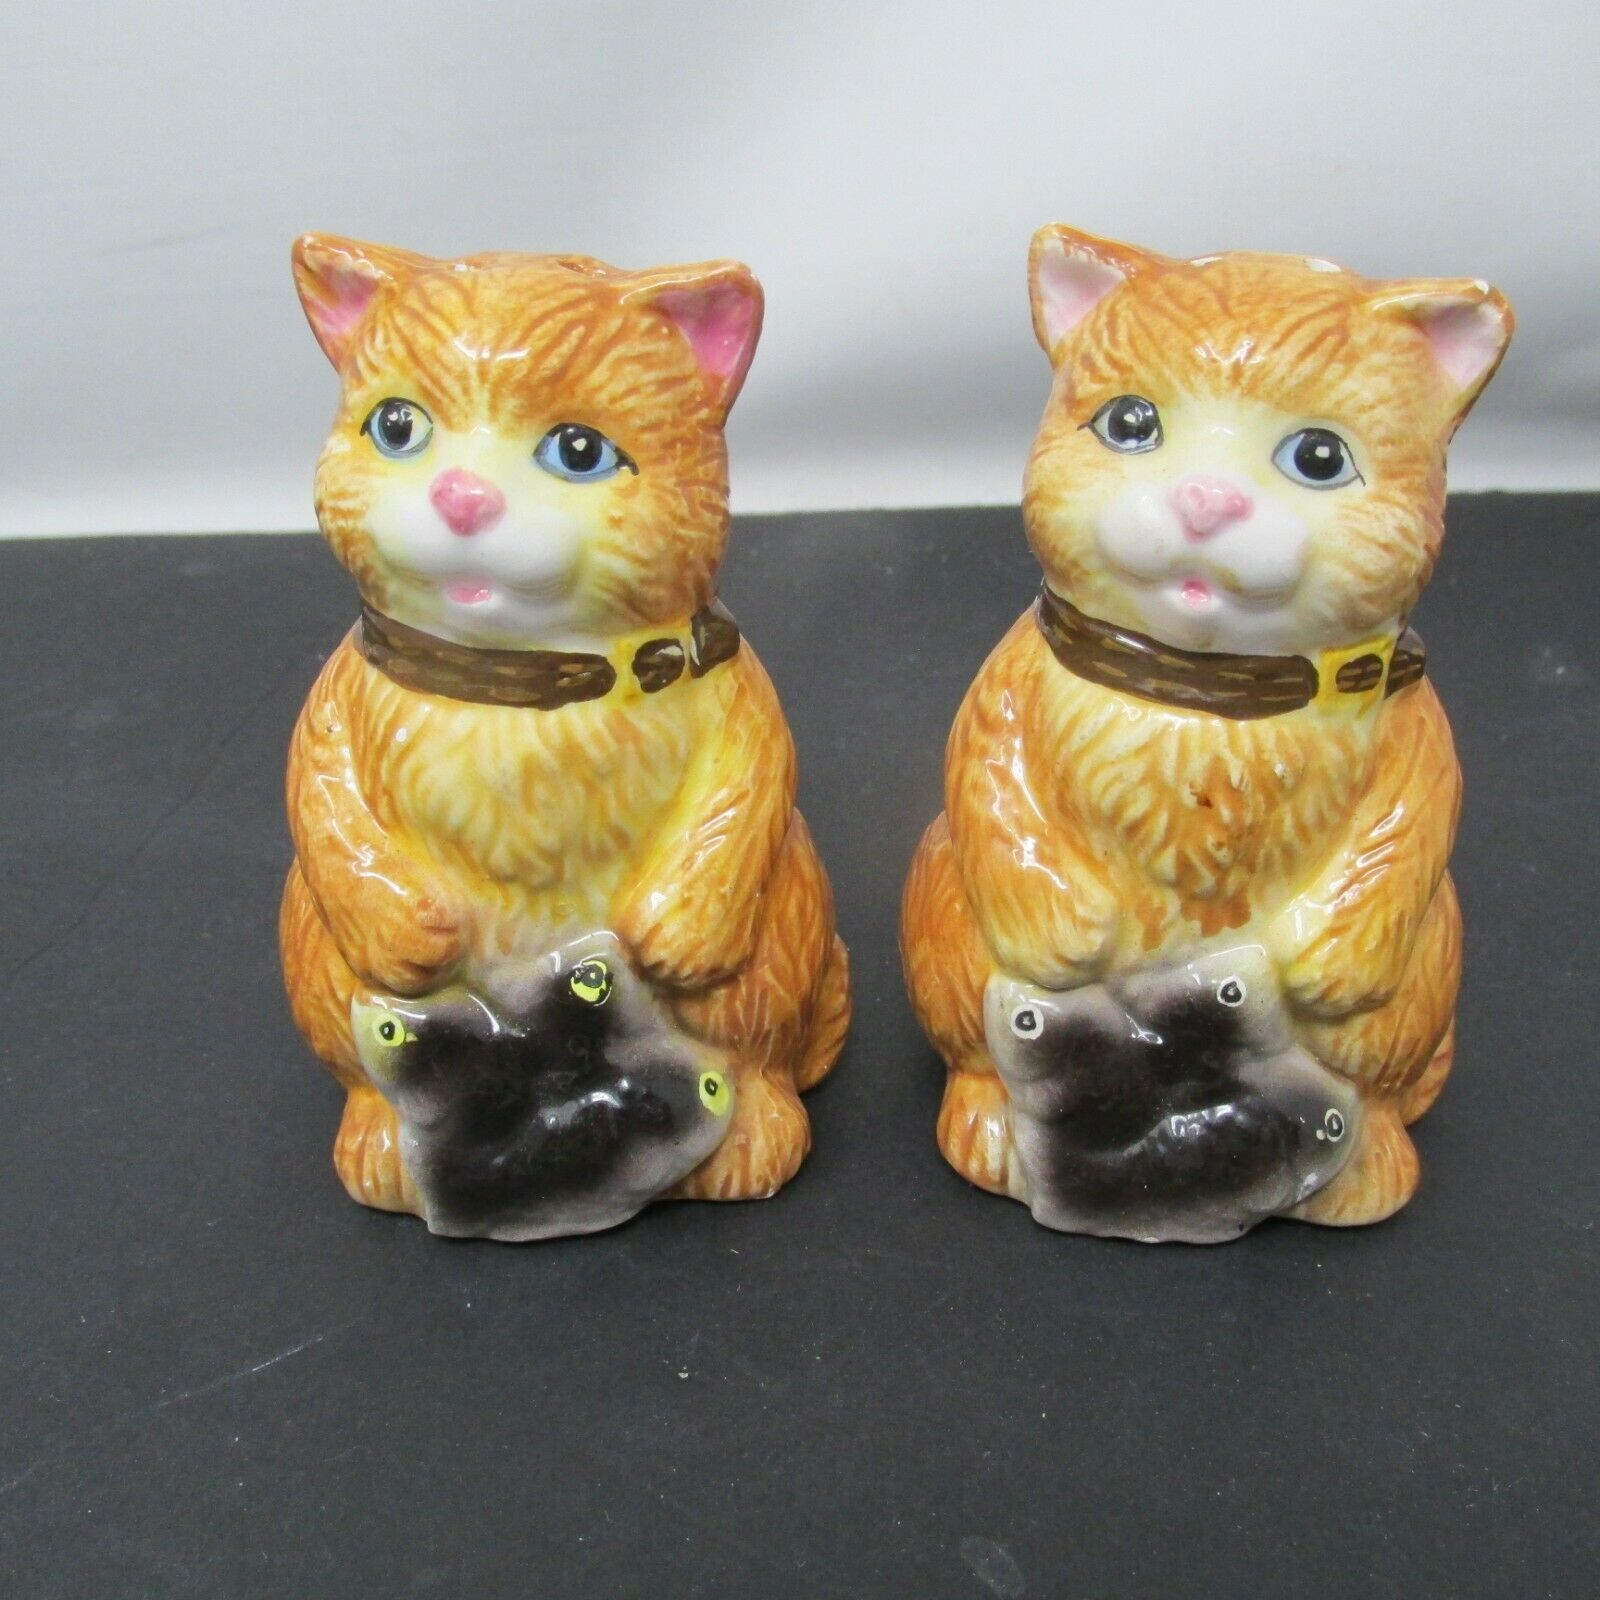 Gkpo Cute Kitty Holding Fish Salt And Pepper Shakers Set Free Shipping